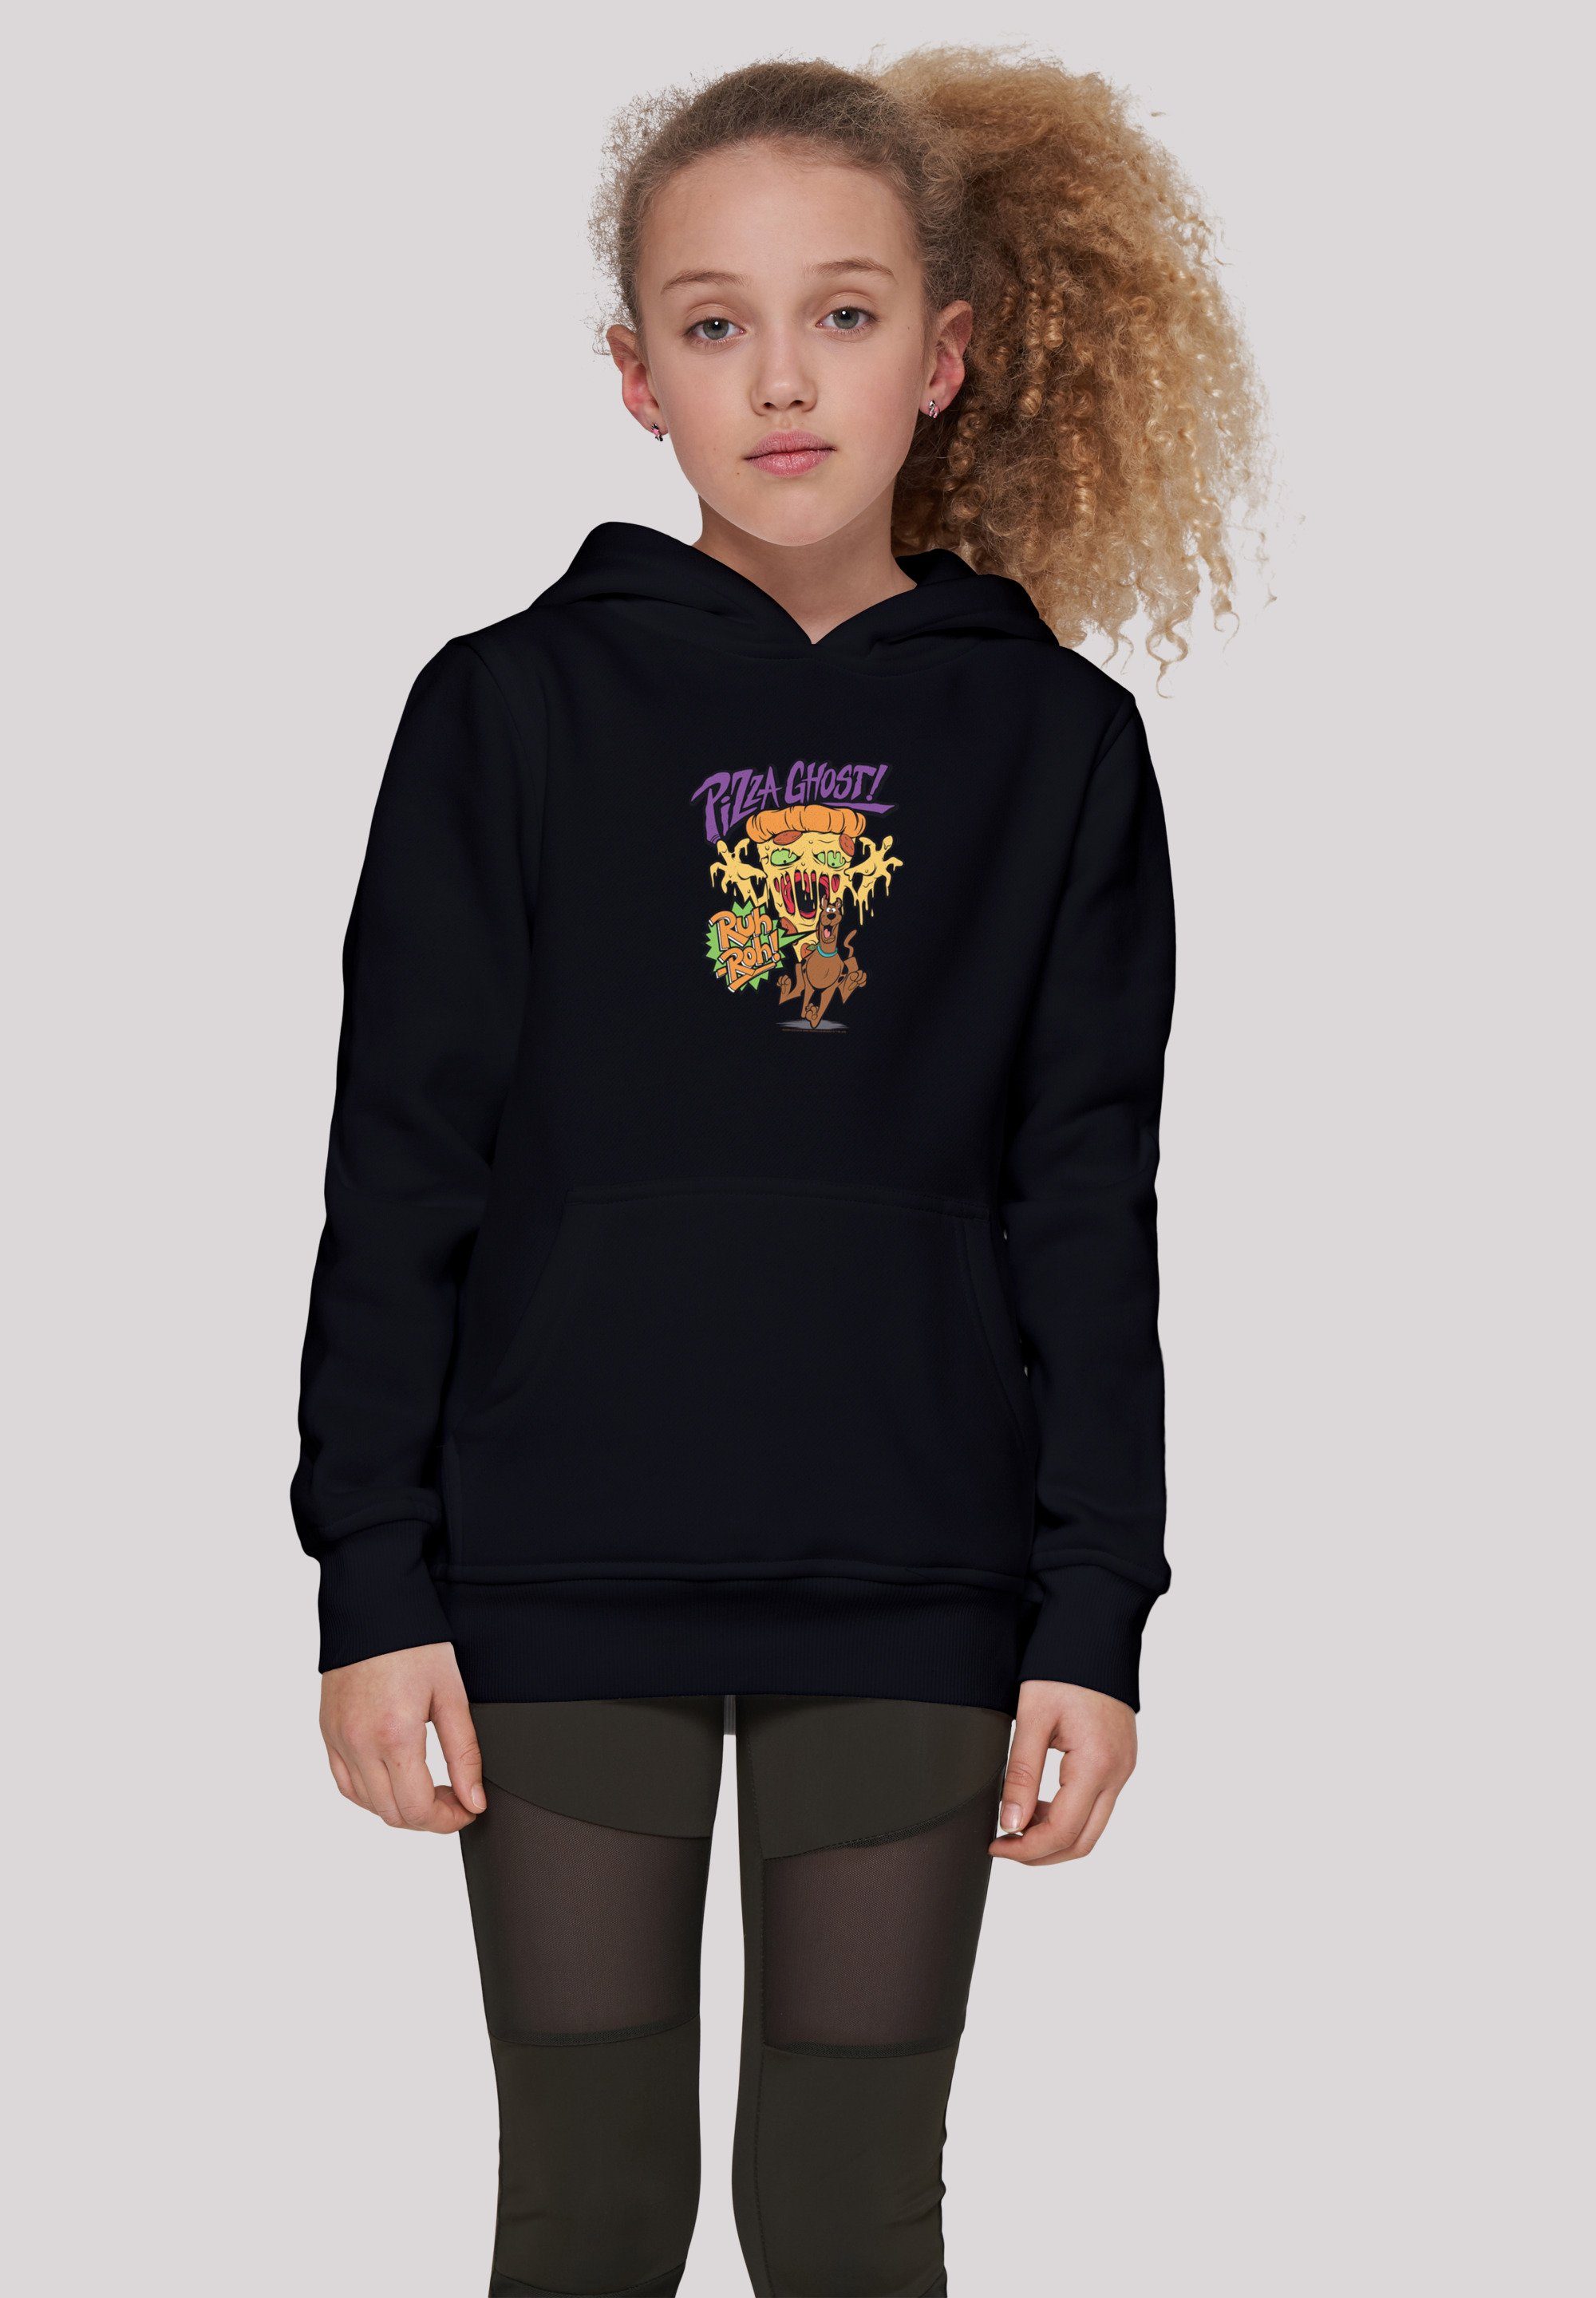 F4NT4STIC Pizza Scooby Basic Doo Kinder Ghost (1-tlg) Kids -BLK with Hoody Hoodie